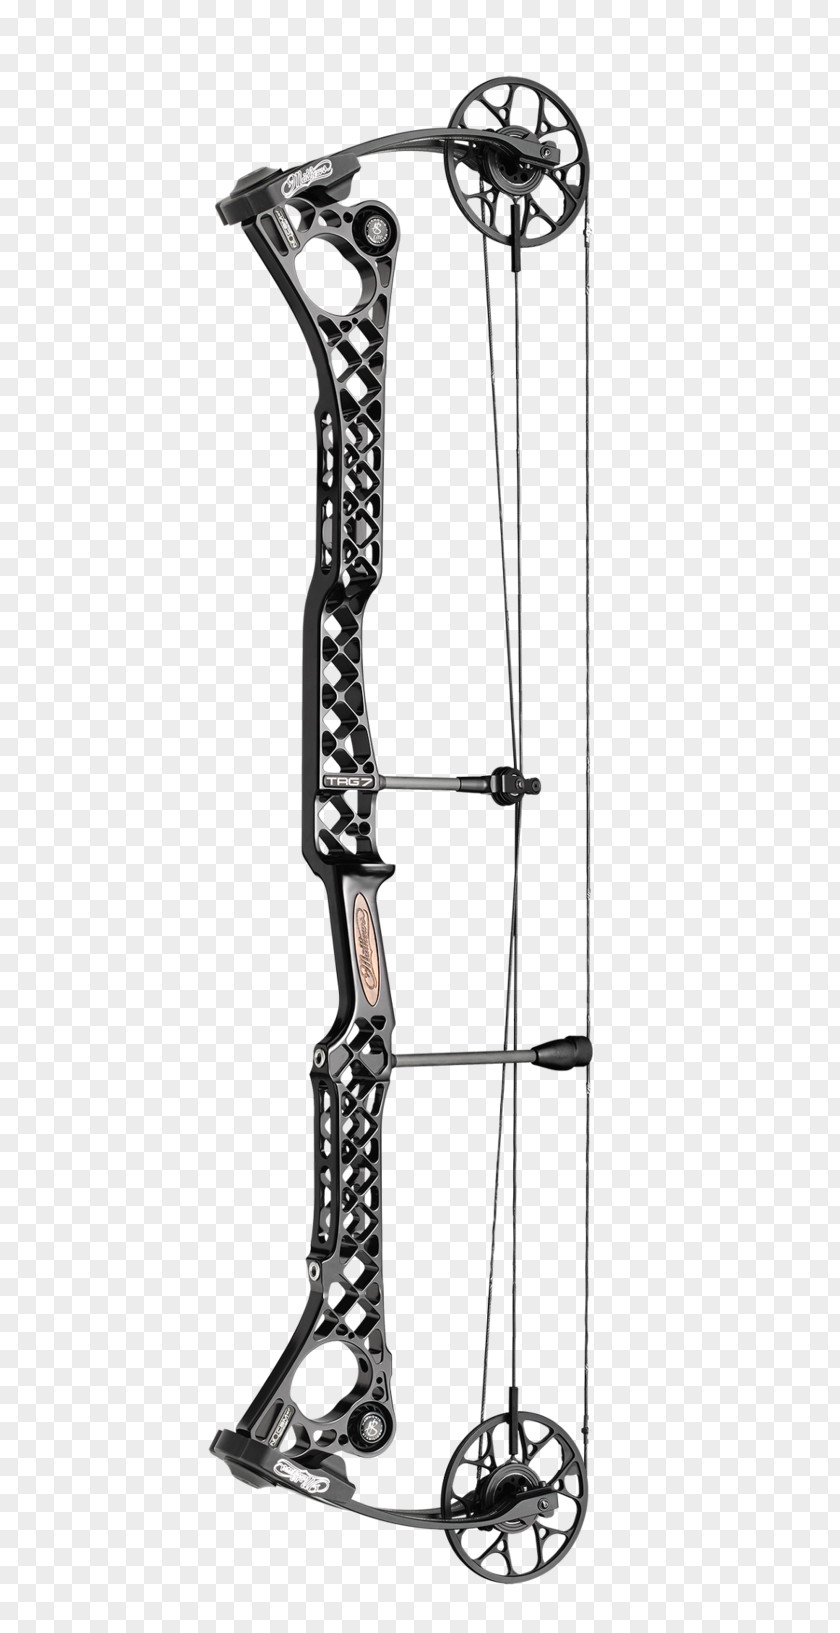 7up Bow And Arrow Compound Bows Bowhunting Archery PNG